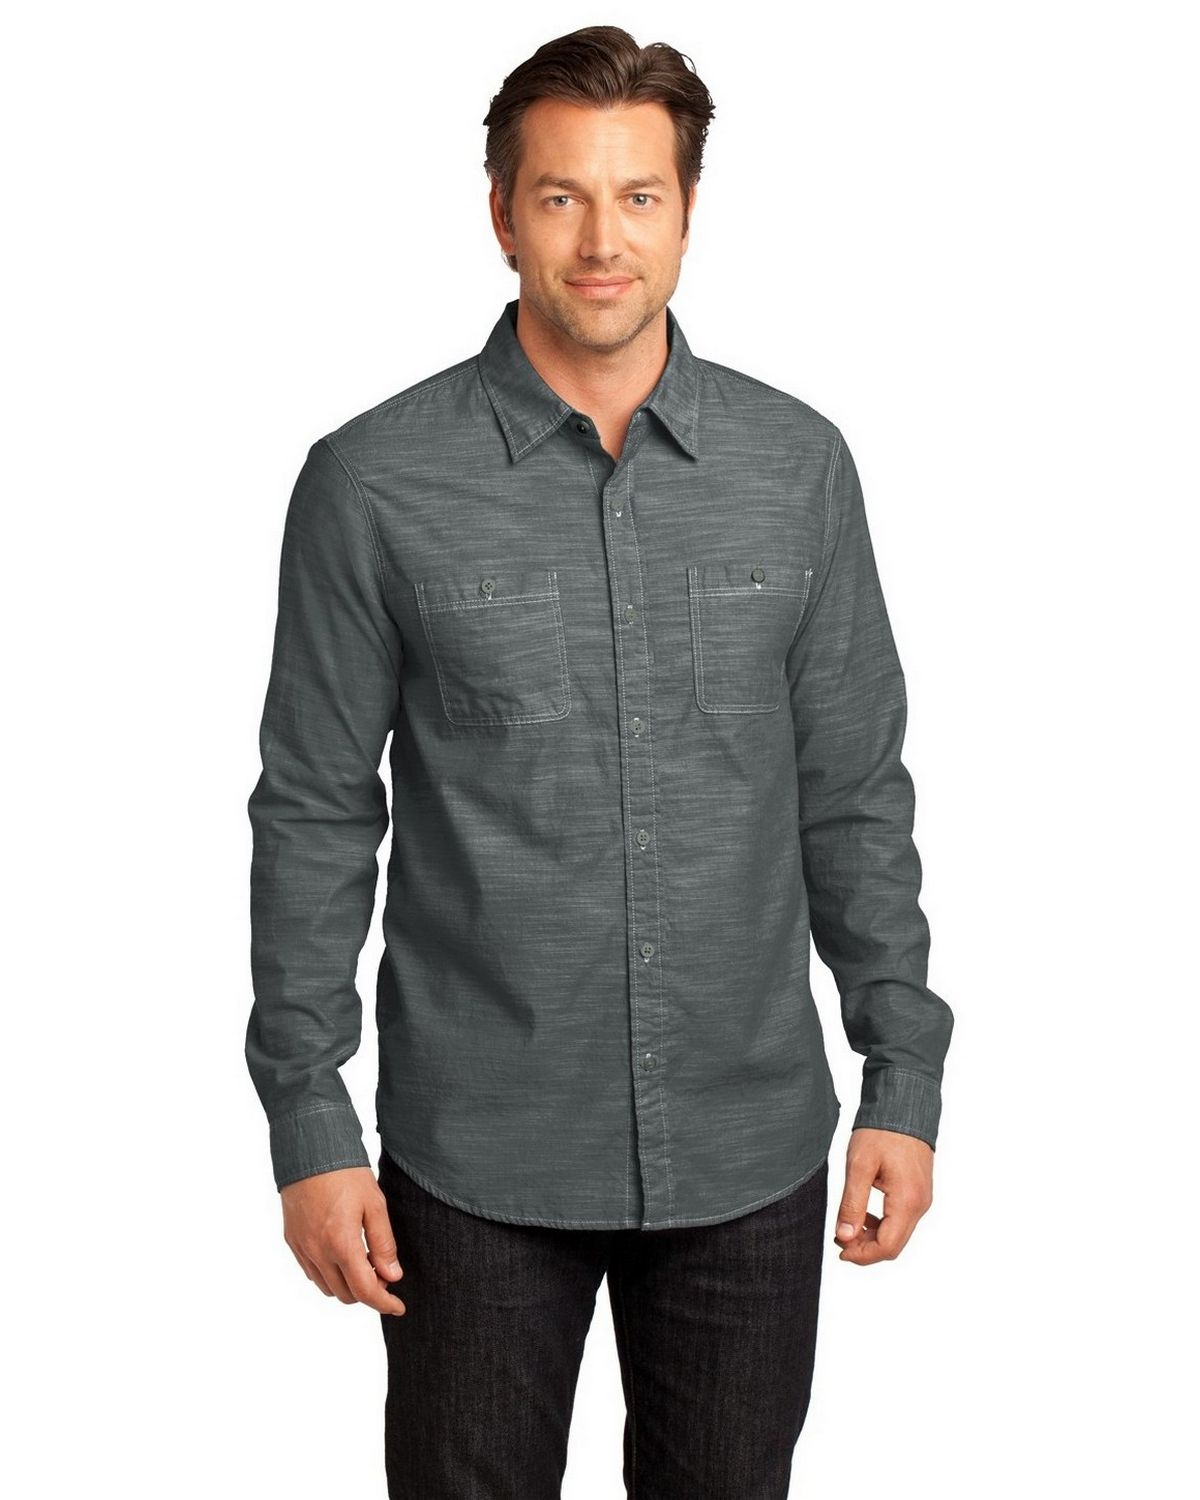 District Made DM3800 Mens Long Sleeve Washed Woven Shirt - Apparelnbags.com